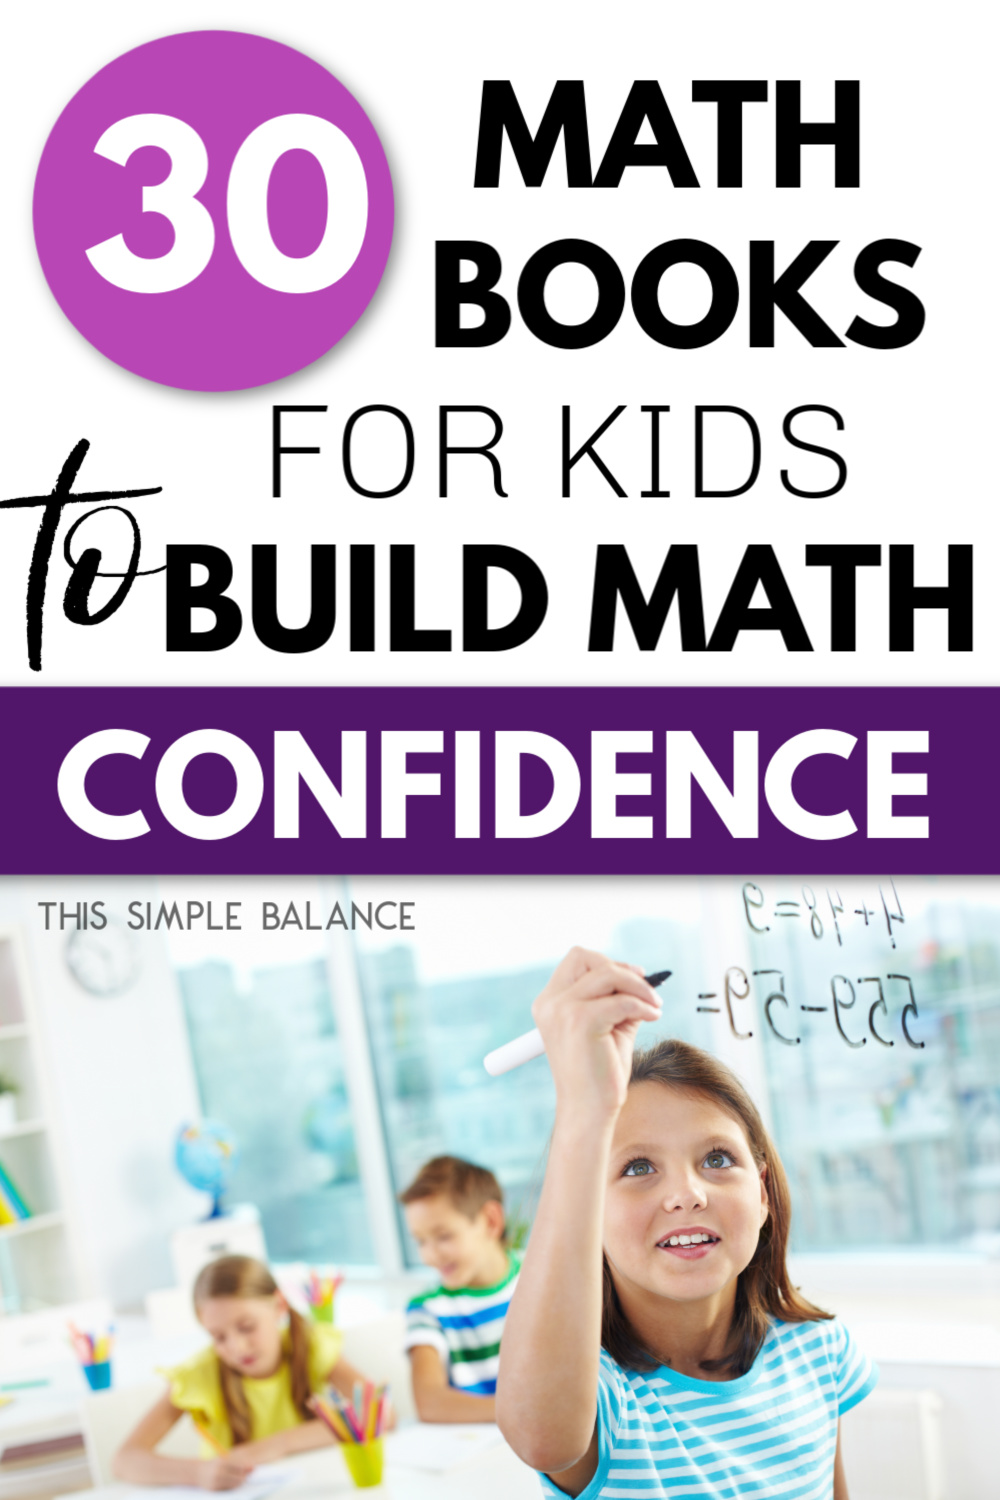 child doing math problems on window with dry erase marker, with text overlay, "30 math books for kids to build math confidence"